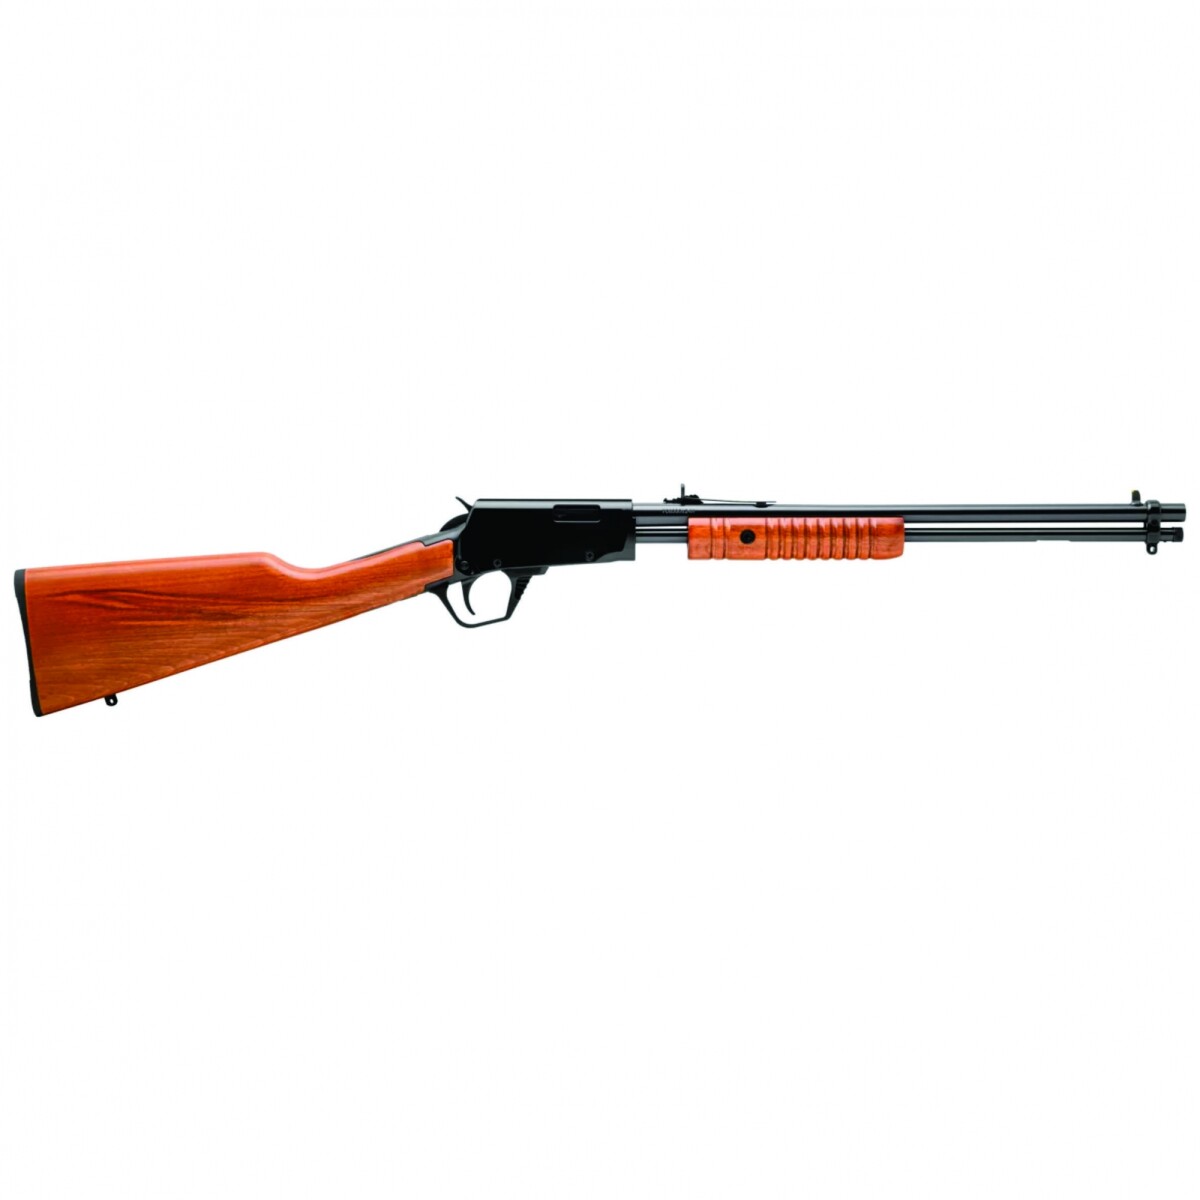 Rifle Rossi Cal 22wmr 20" Mod Gallery Madera 